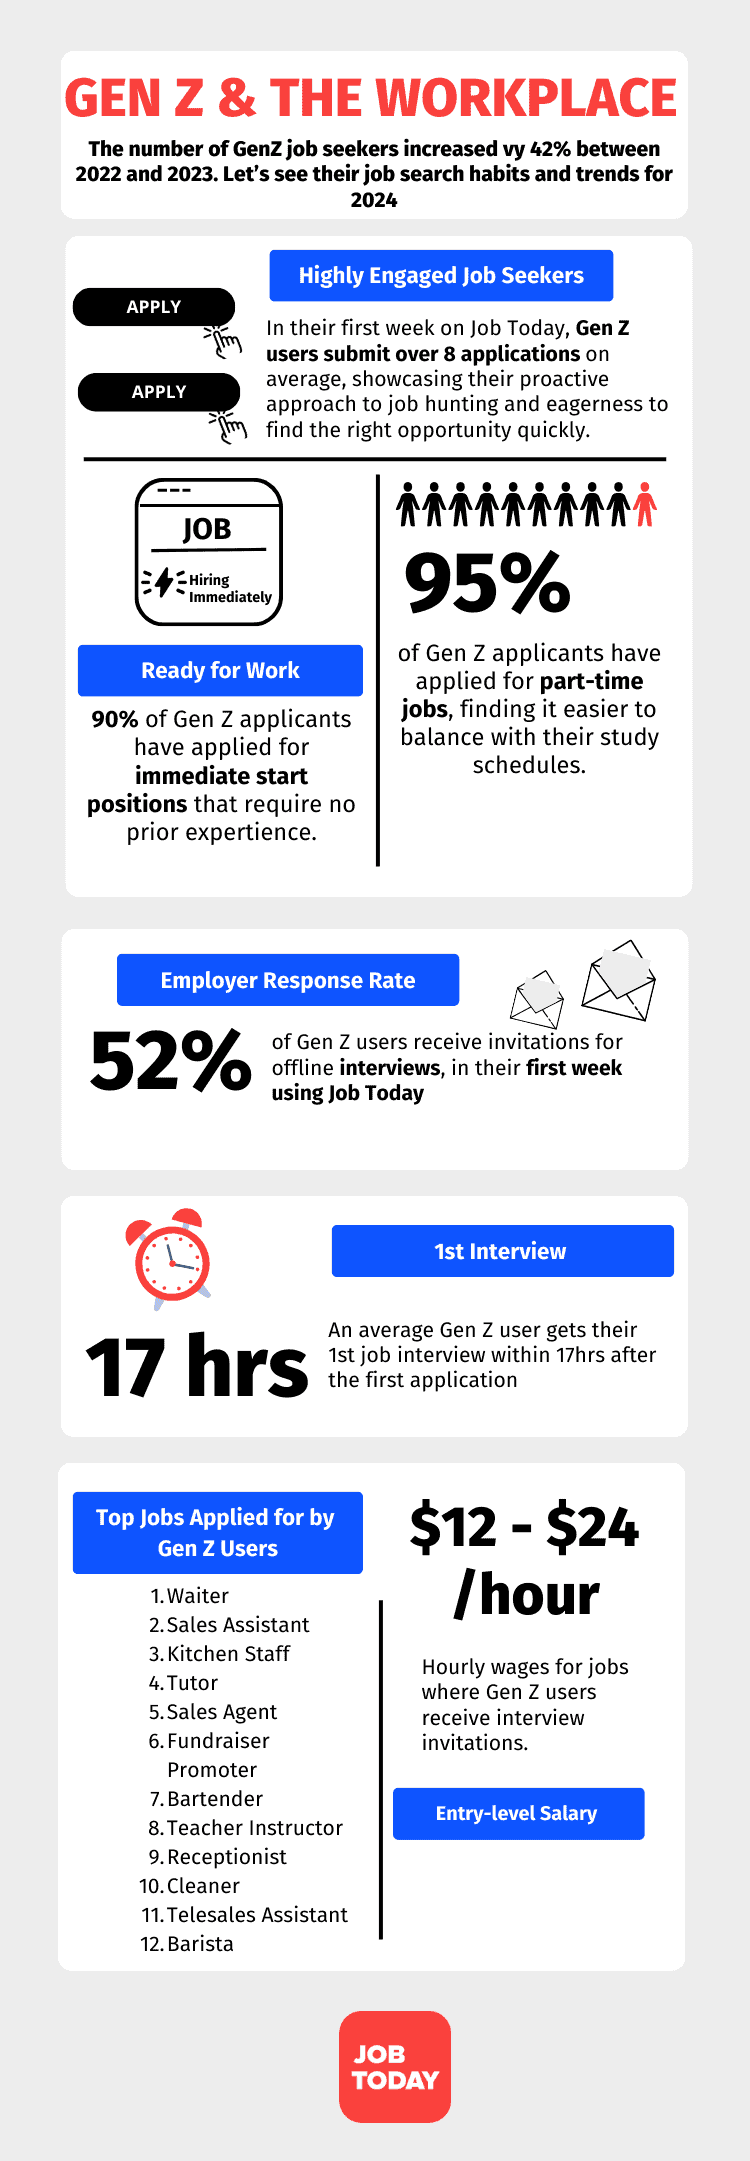 Job Today infographic about Gen Z job search trends and statistics